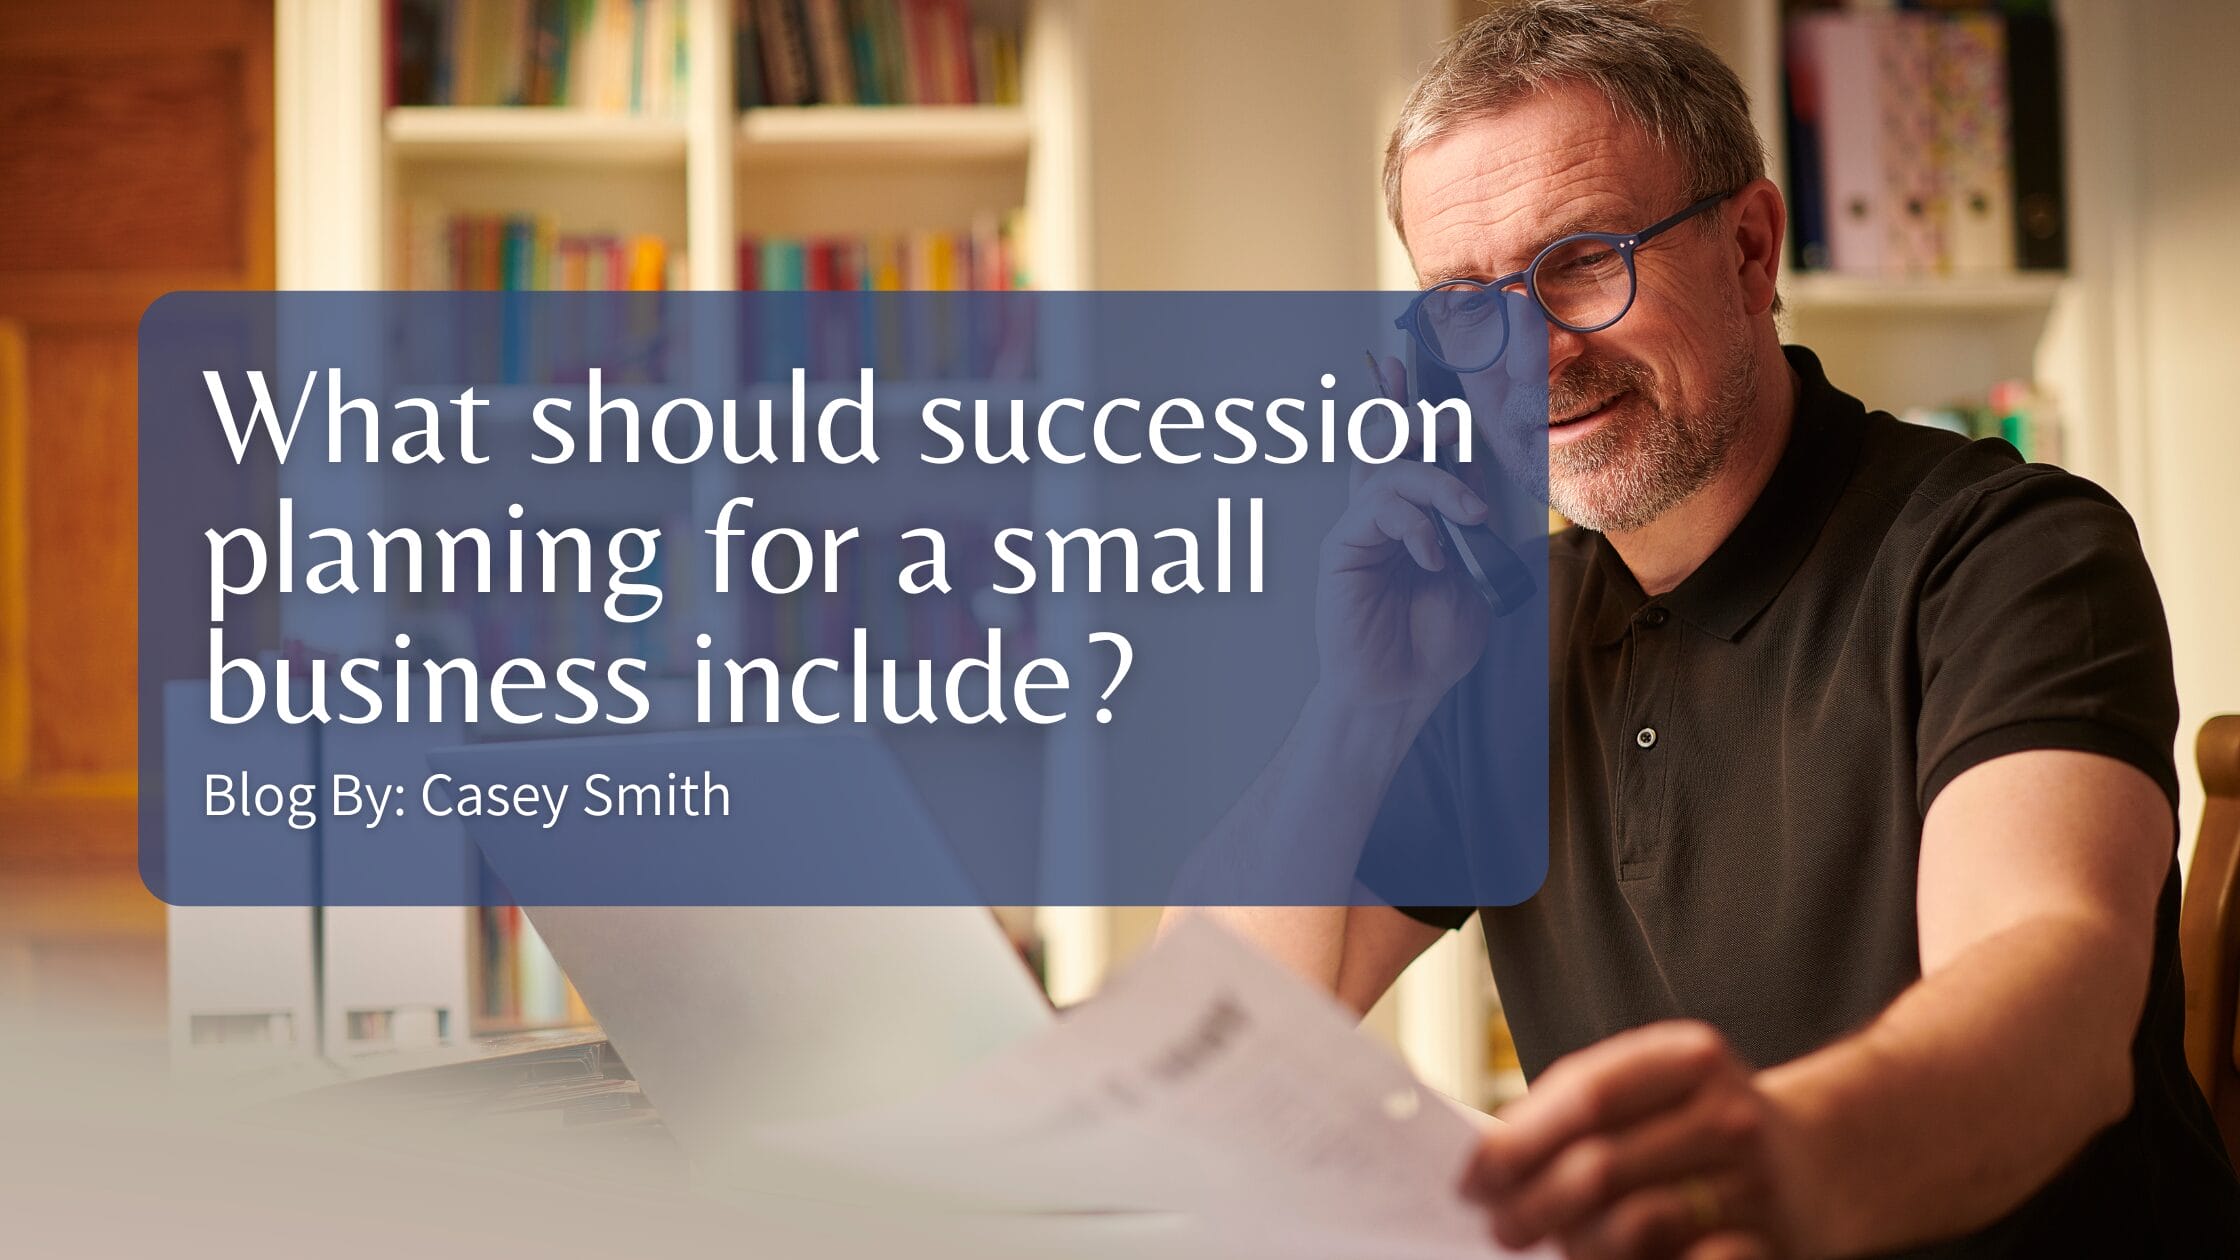 What should succession planning for a small business include?